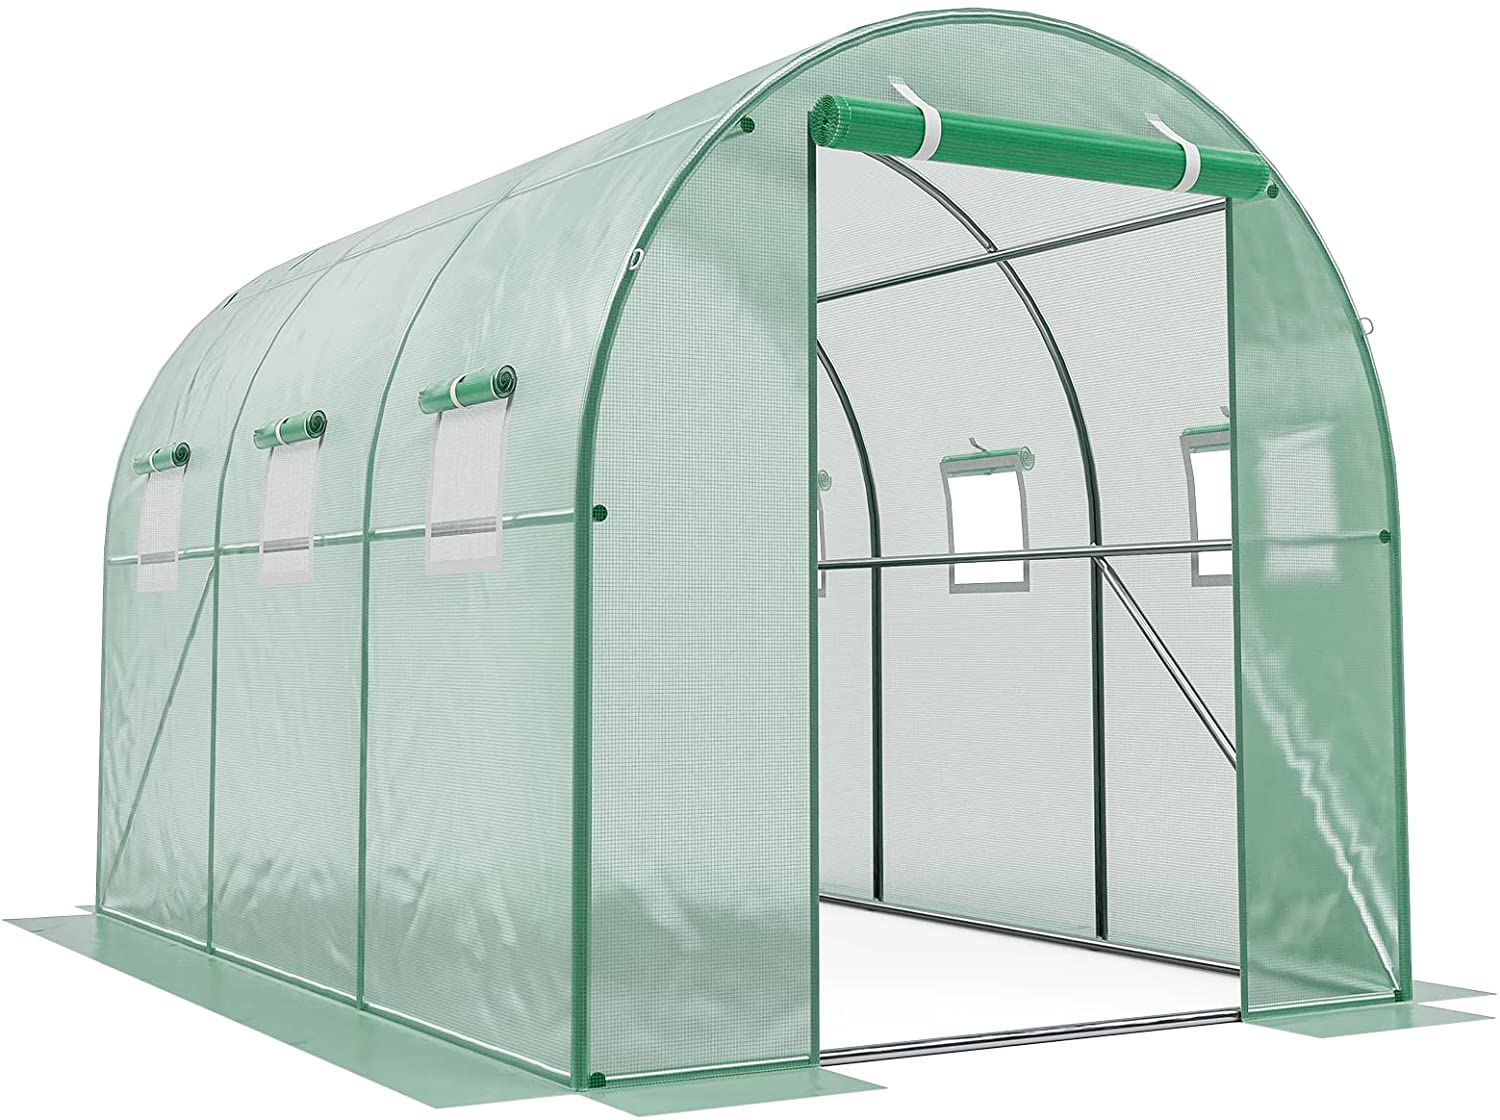 Oarlike Greenhouse for Outdoors 10x7x7FT Upgraded Large Hot House for Green Garden Plant w/ Heavy Duty Galvanized Steel Frame Portable Walk-in Tunnel Tent